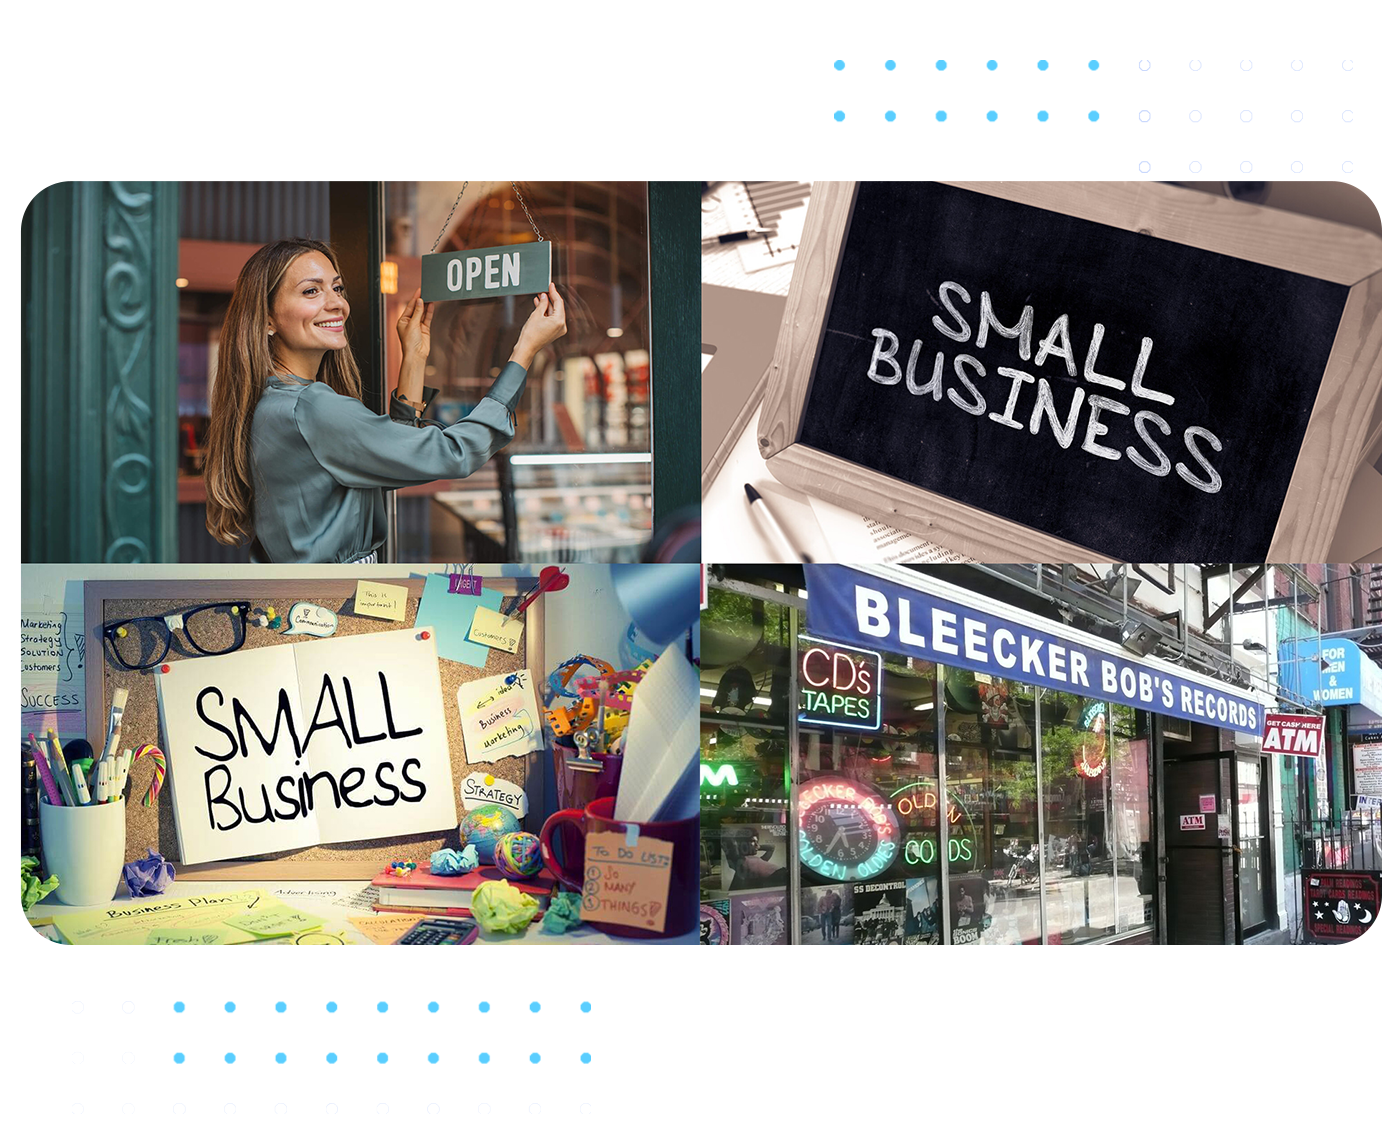 A picture containing several images of small businesses